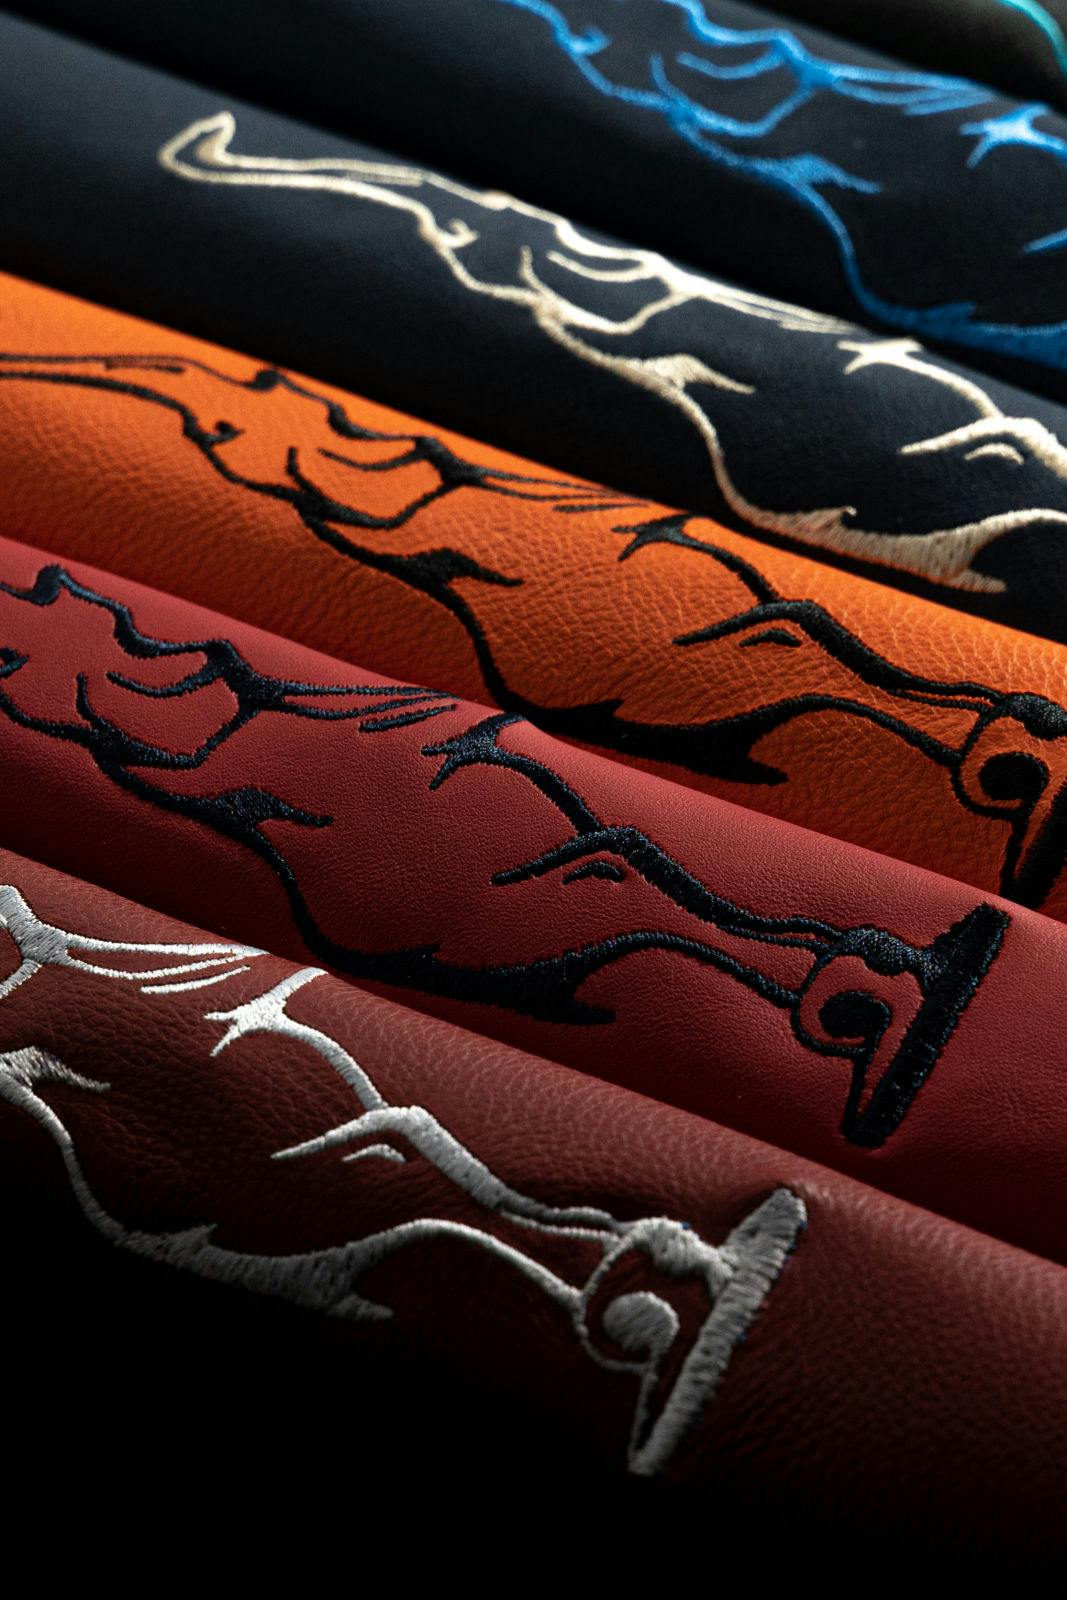 A wide range of unique hues for leather and yarn allows a high degree of personalization.